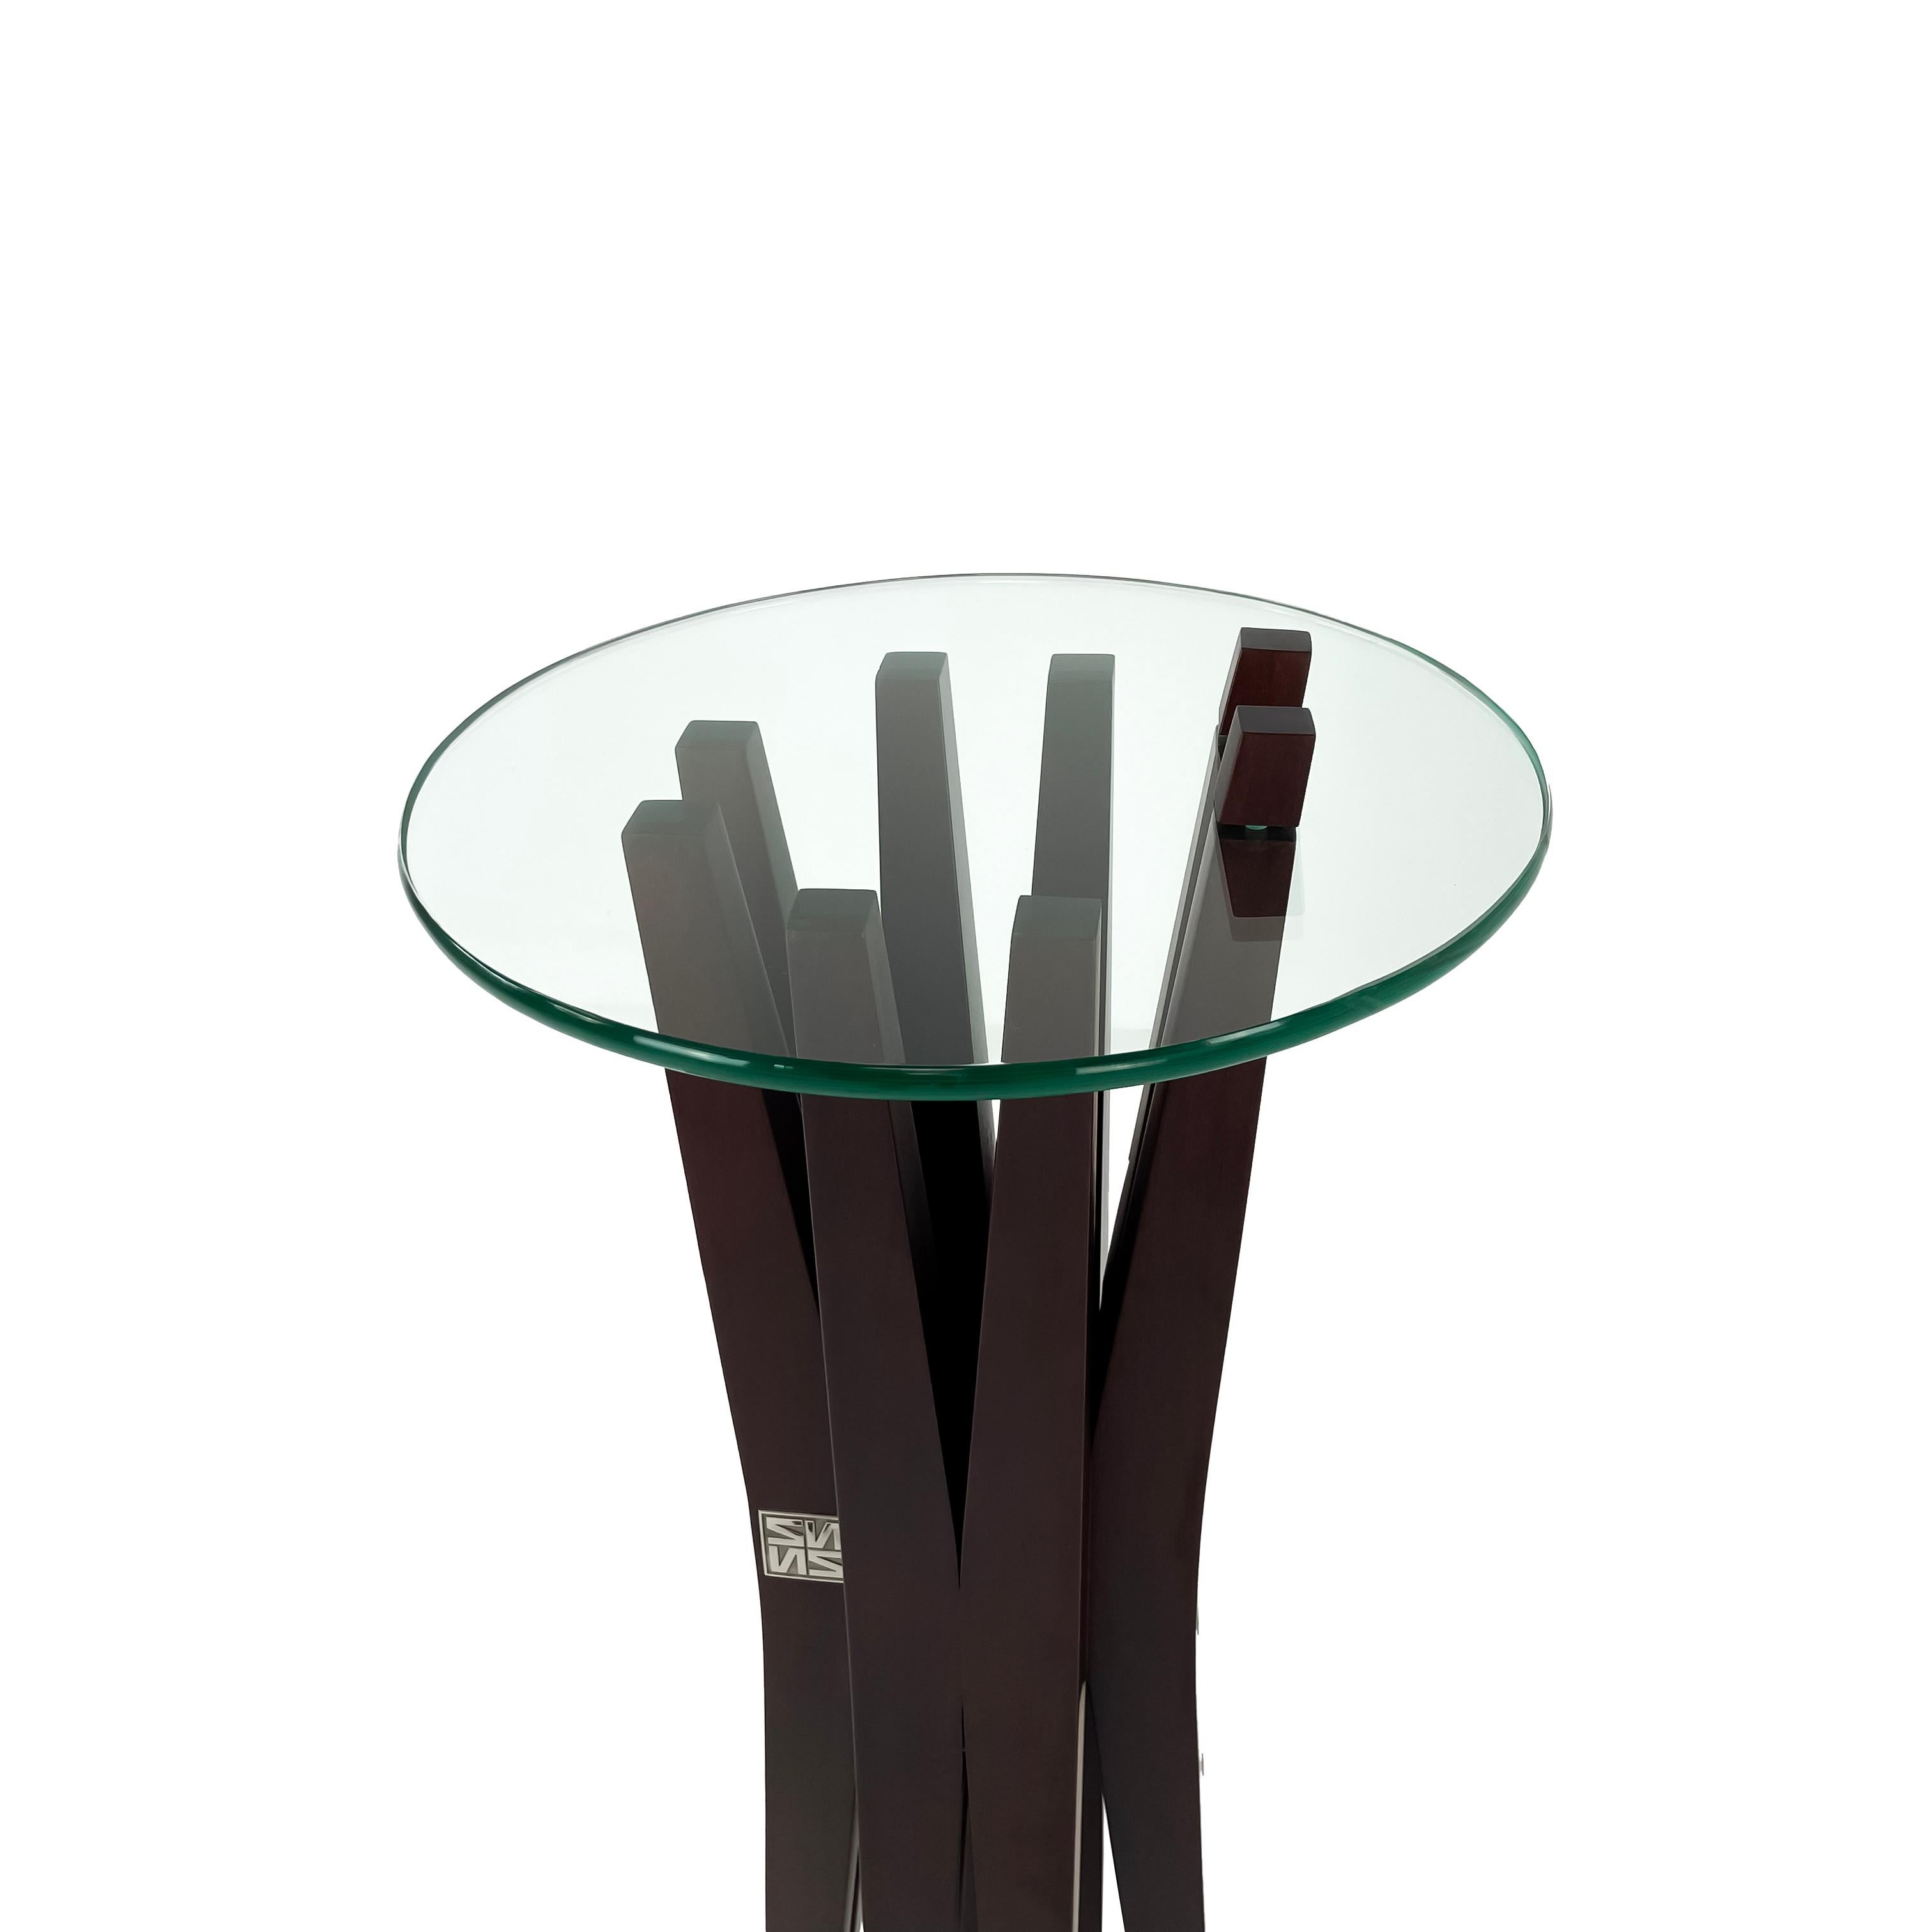 Modern solid wood and glass pedestal by Pierre Sarkis from Celine Collection. Inspired by the roots and branches of a tree that represents life and beauty. Elegant pedestal with tempered glass top.
Dimensions: Glass top: 0.5